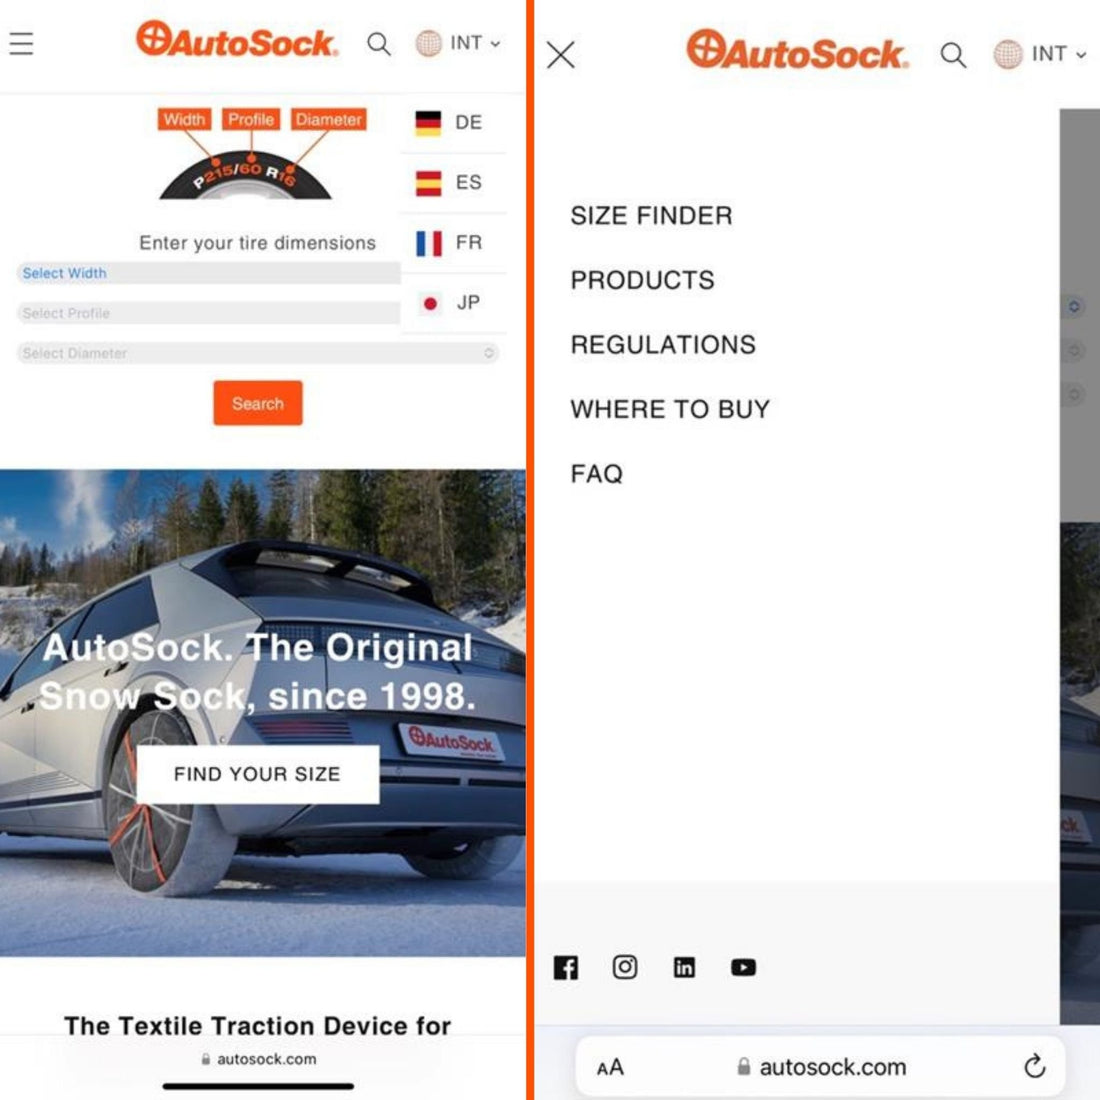 The official website of the inventor of snow socks autosock.com is updated as mobile first design